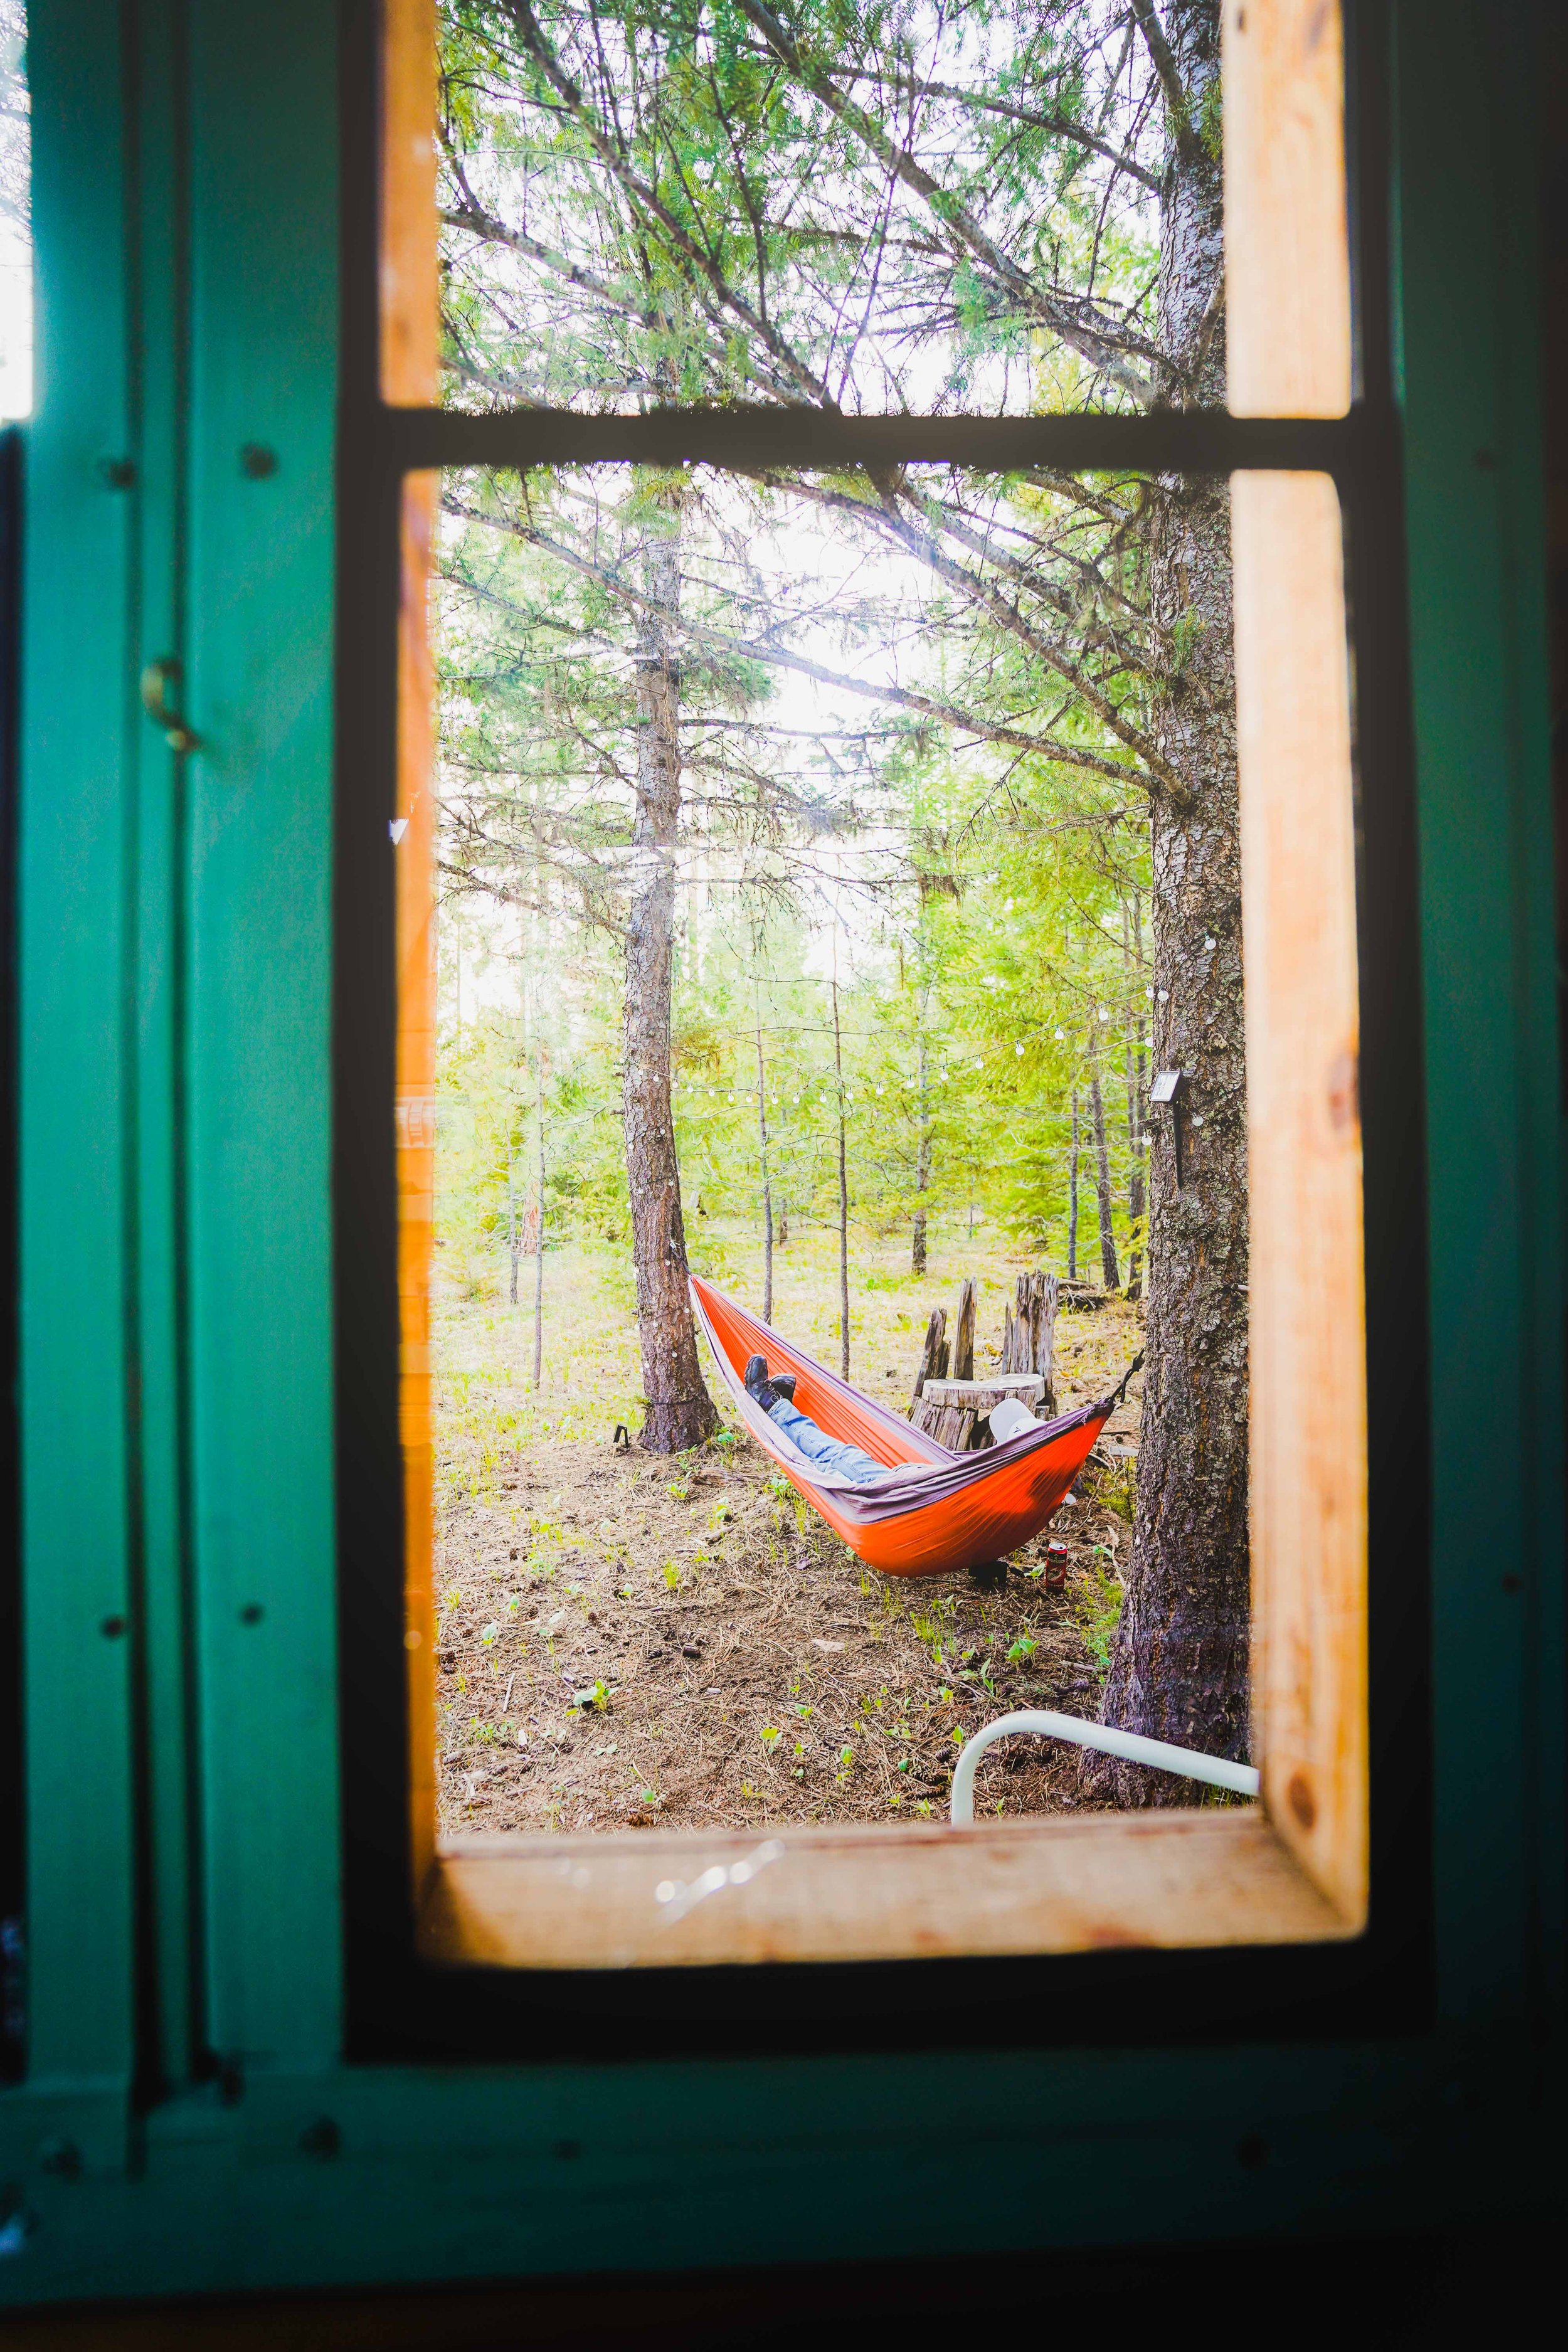 A relaxing view outside The A-frame Cabin at The Hohnstead Glamping Cabins Resort near Missoula, Montana